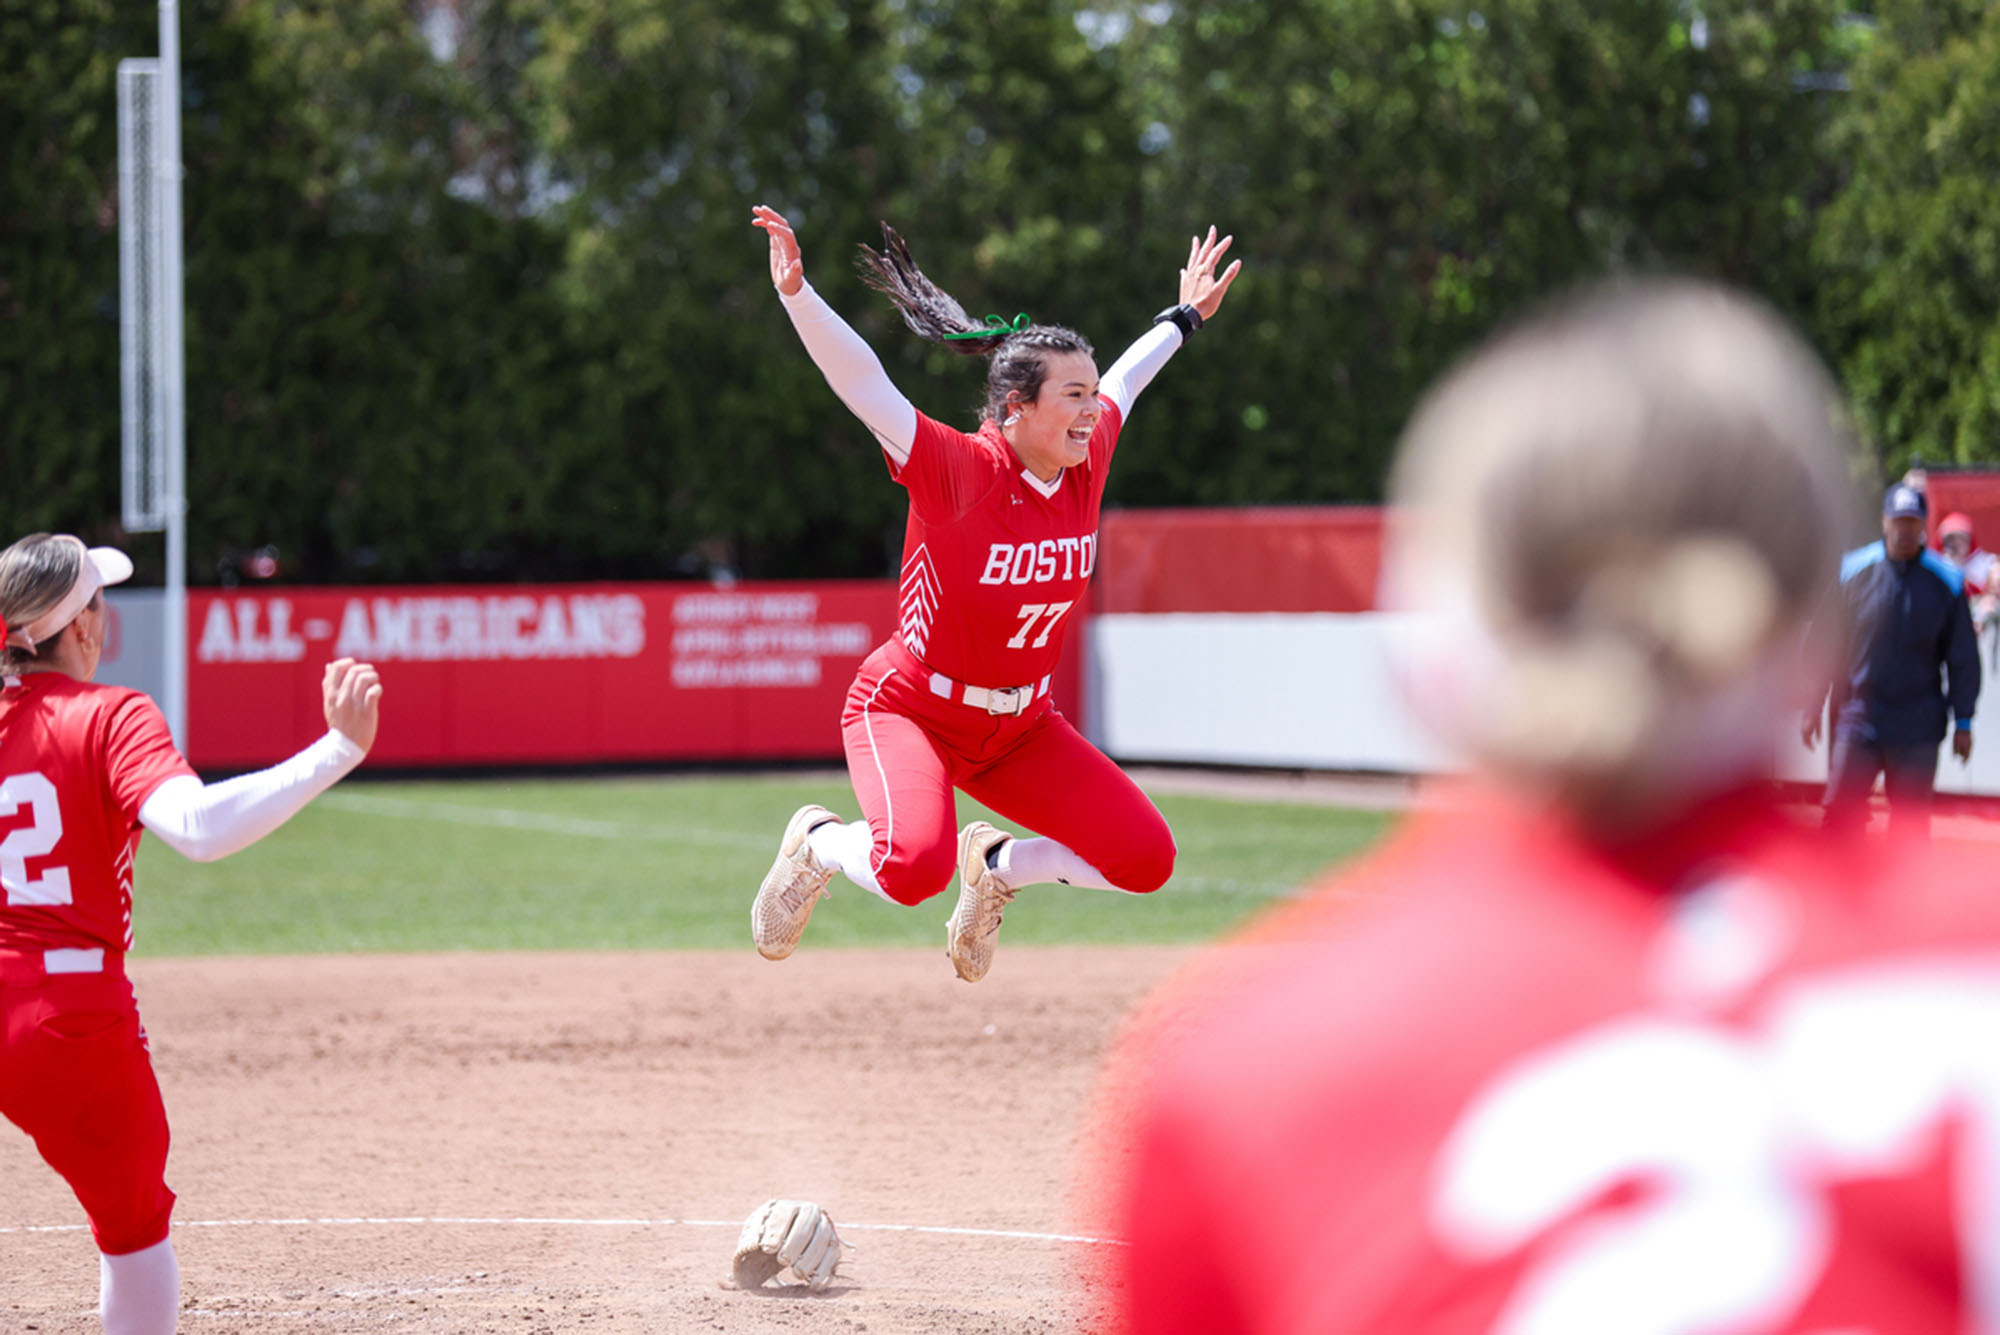 Photo: A picture of a girl in a red softball uniform with white accents jumping on the field in excitement